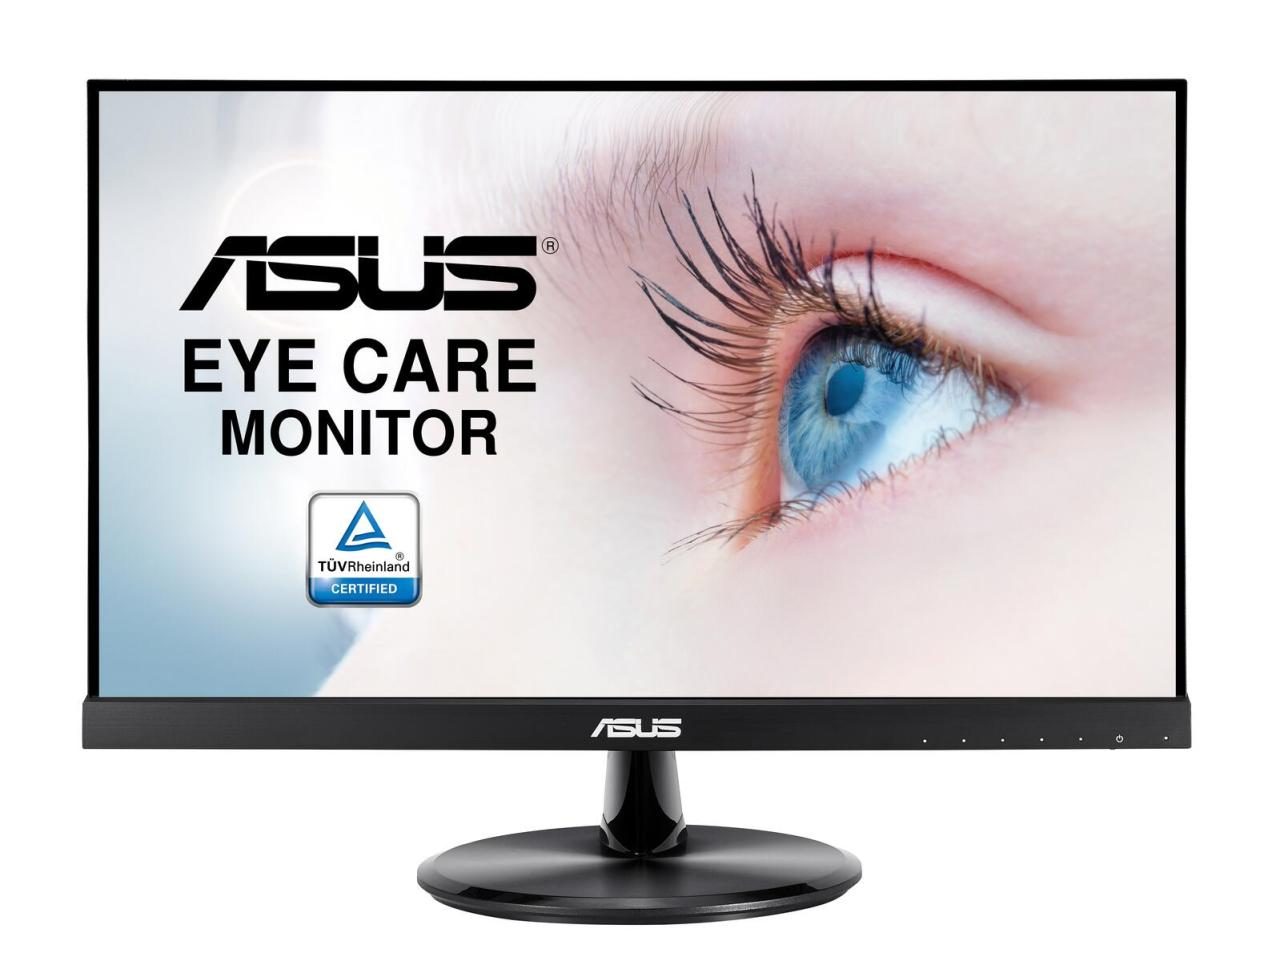 ASUS Eye Care VP229HE Monitor 54,6cm (21,5 Zoll) von ASUS